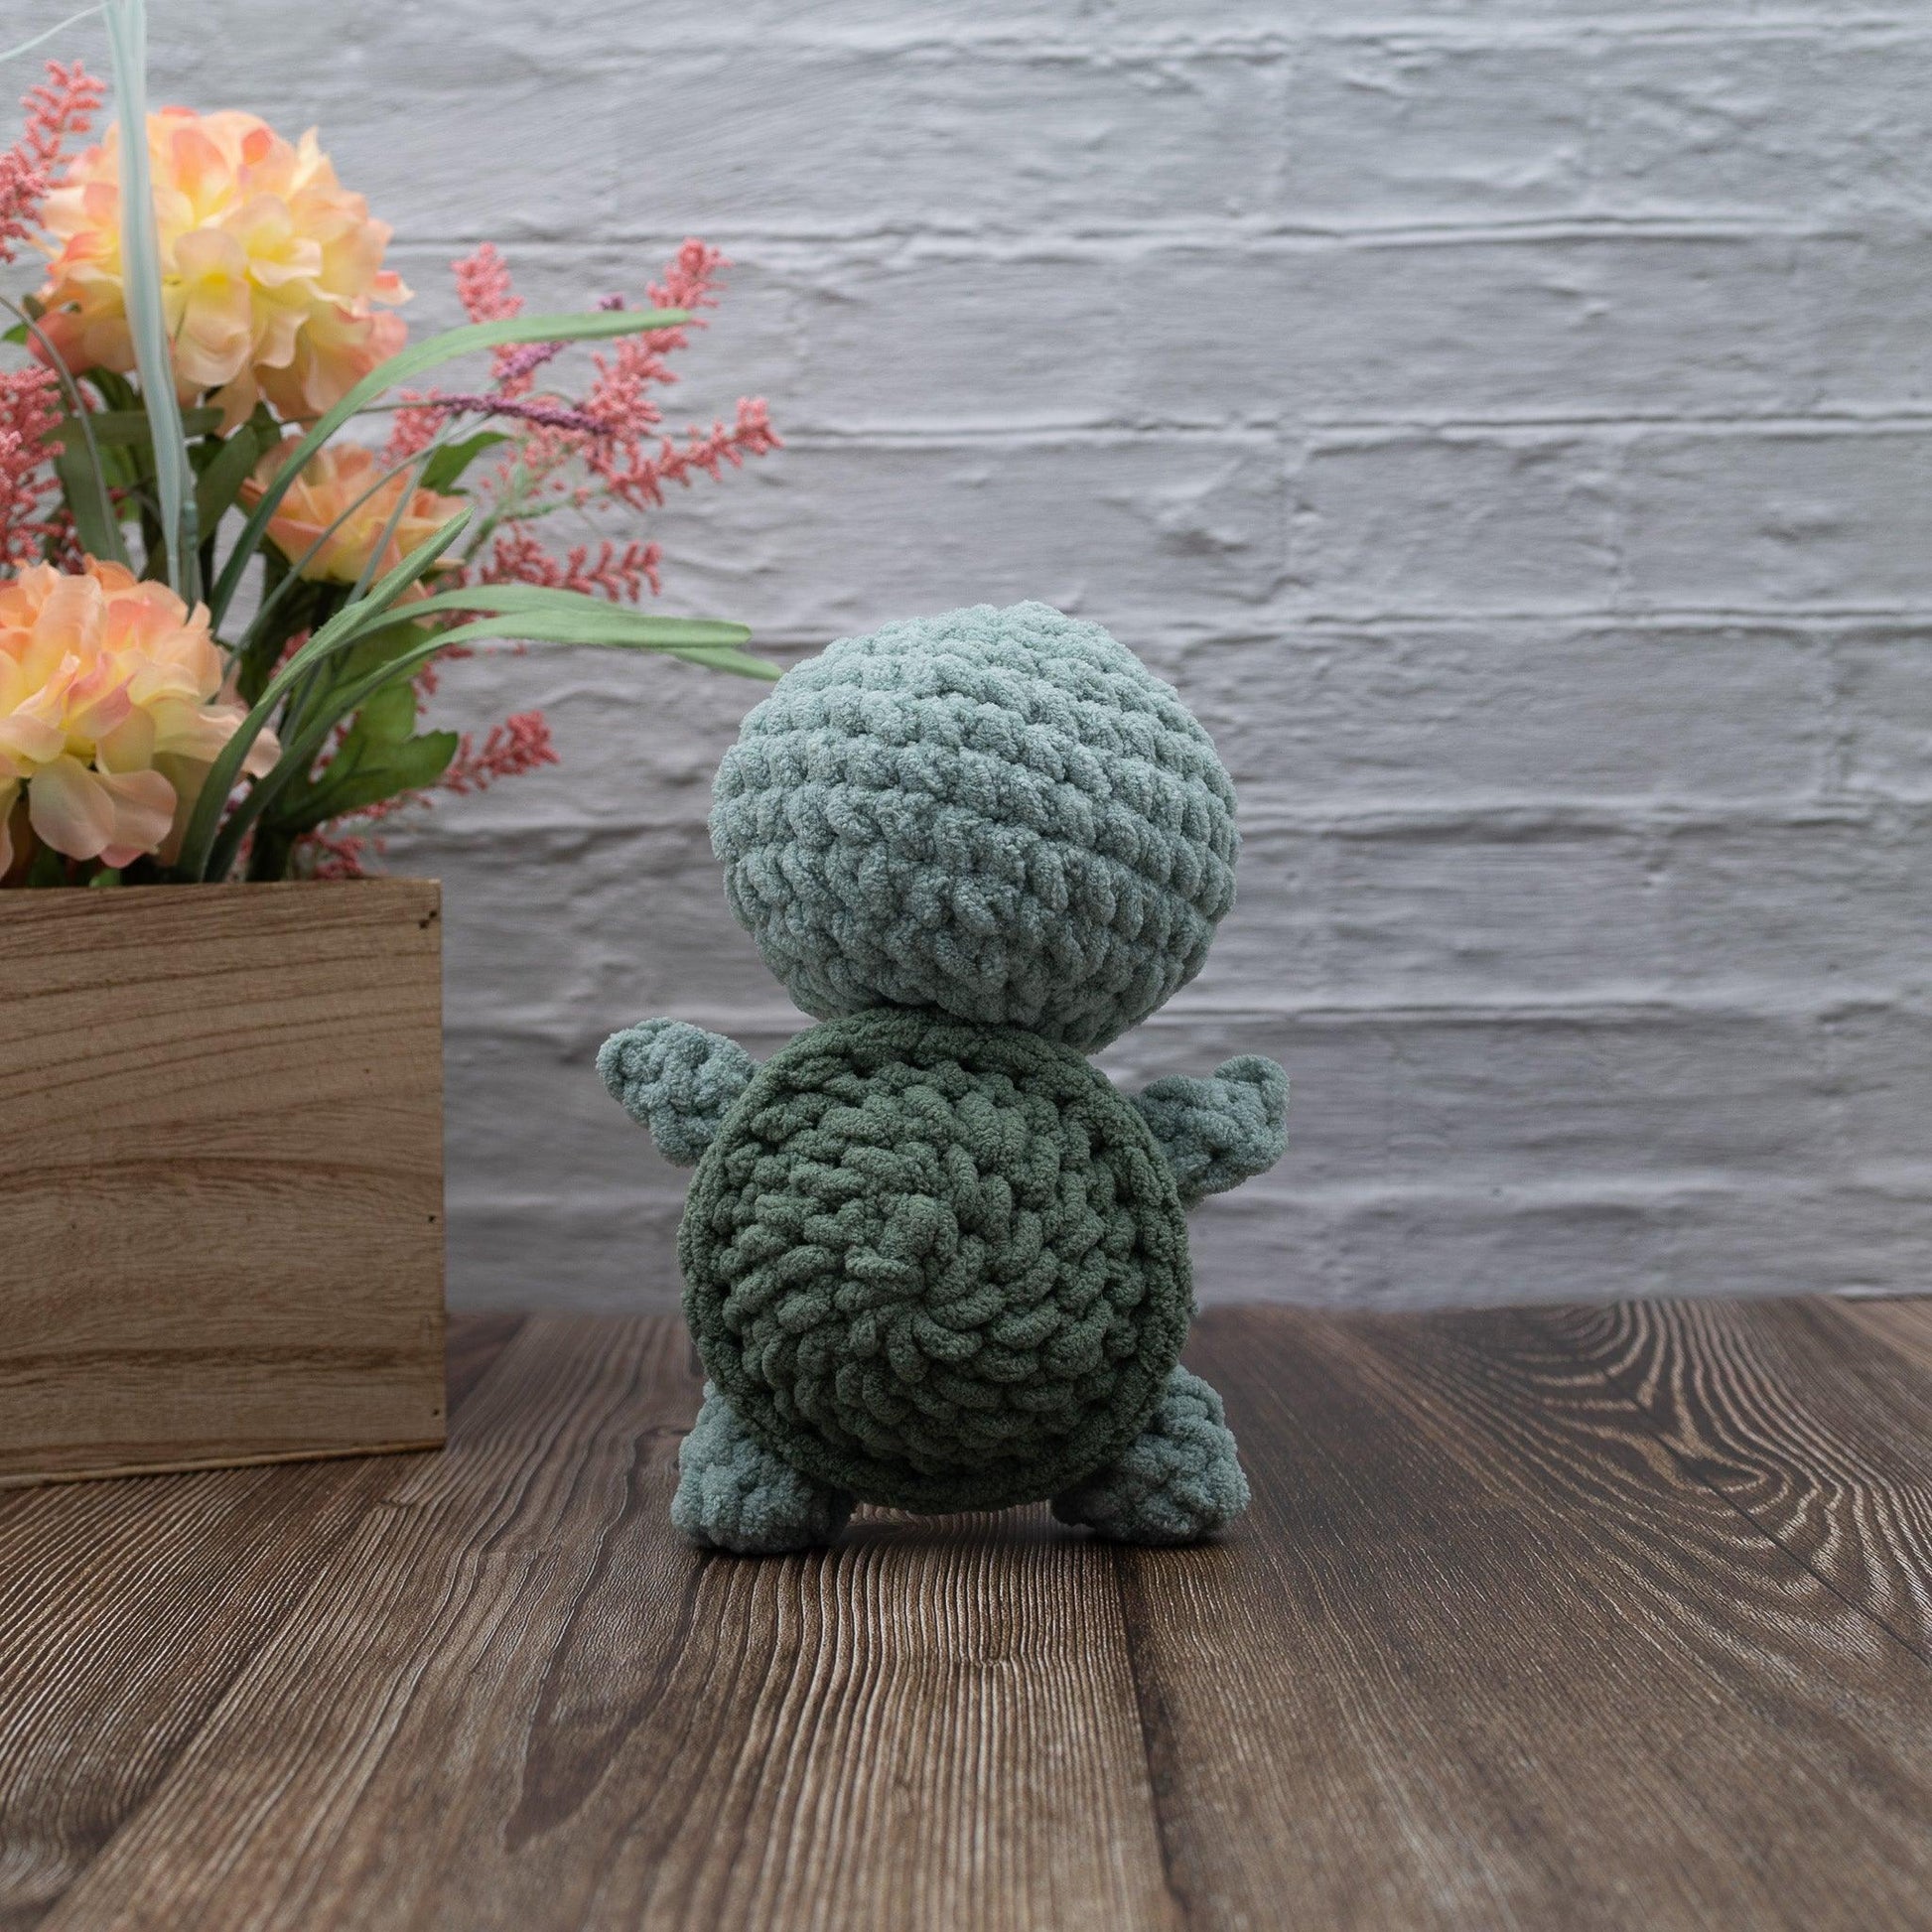 4Stitches Designs 9 Inch Crochet Turtle Hatchling Plush Toy - Hand-Made Stuffed Animal Gift for Kids